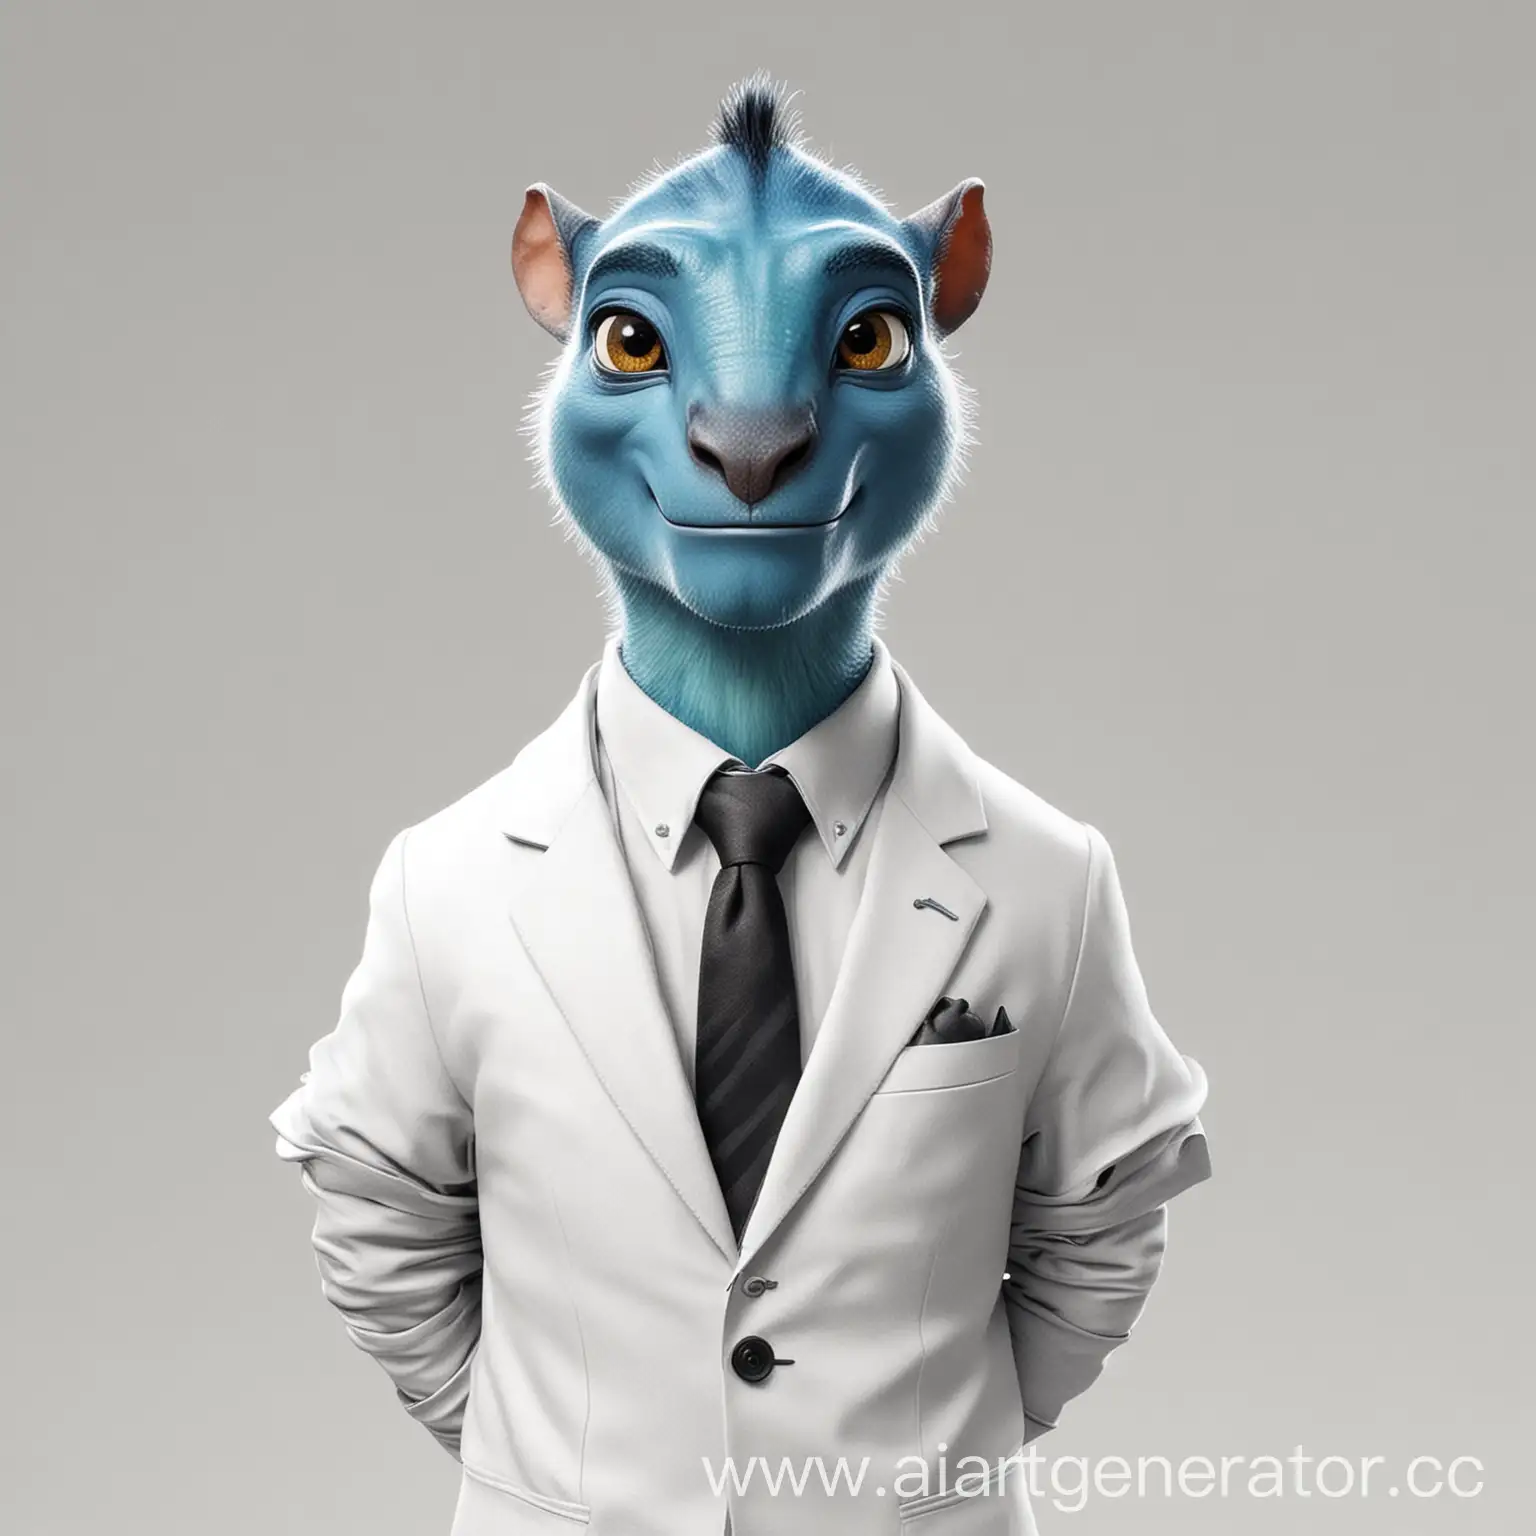 Pixar-Style-Animal-Avatar-in-Office-Suit-on-White-Background